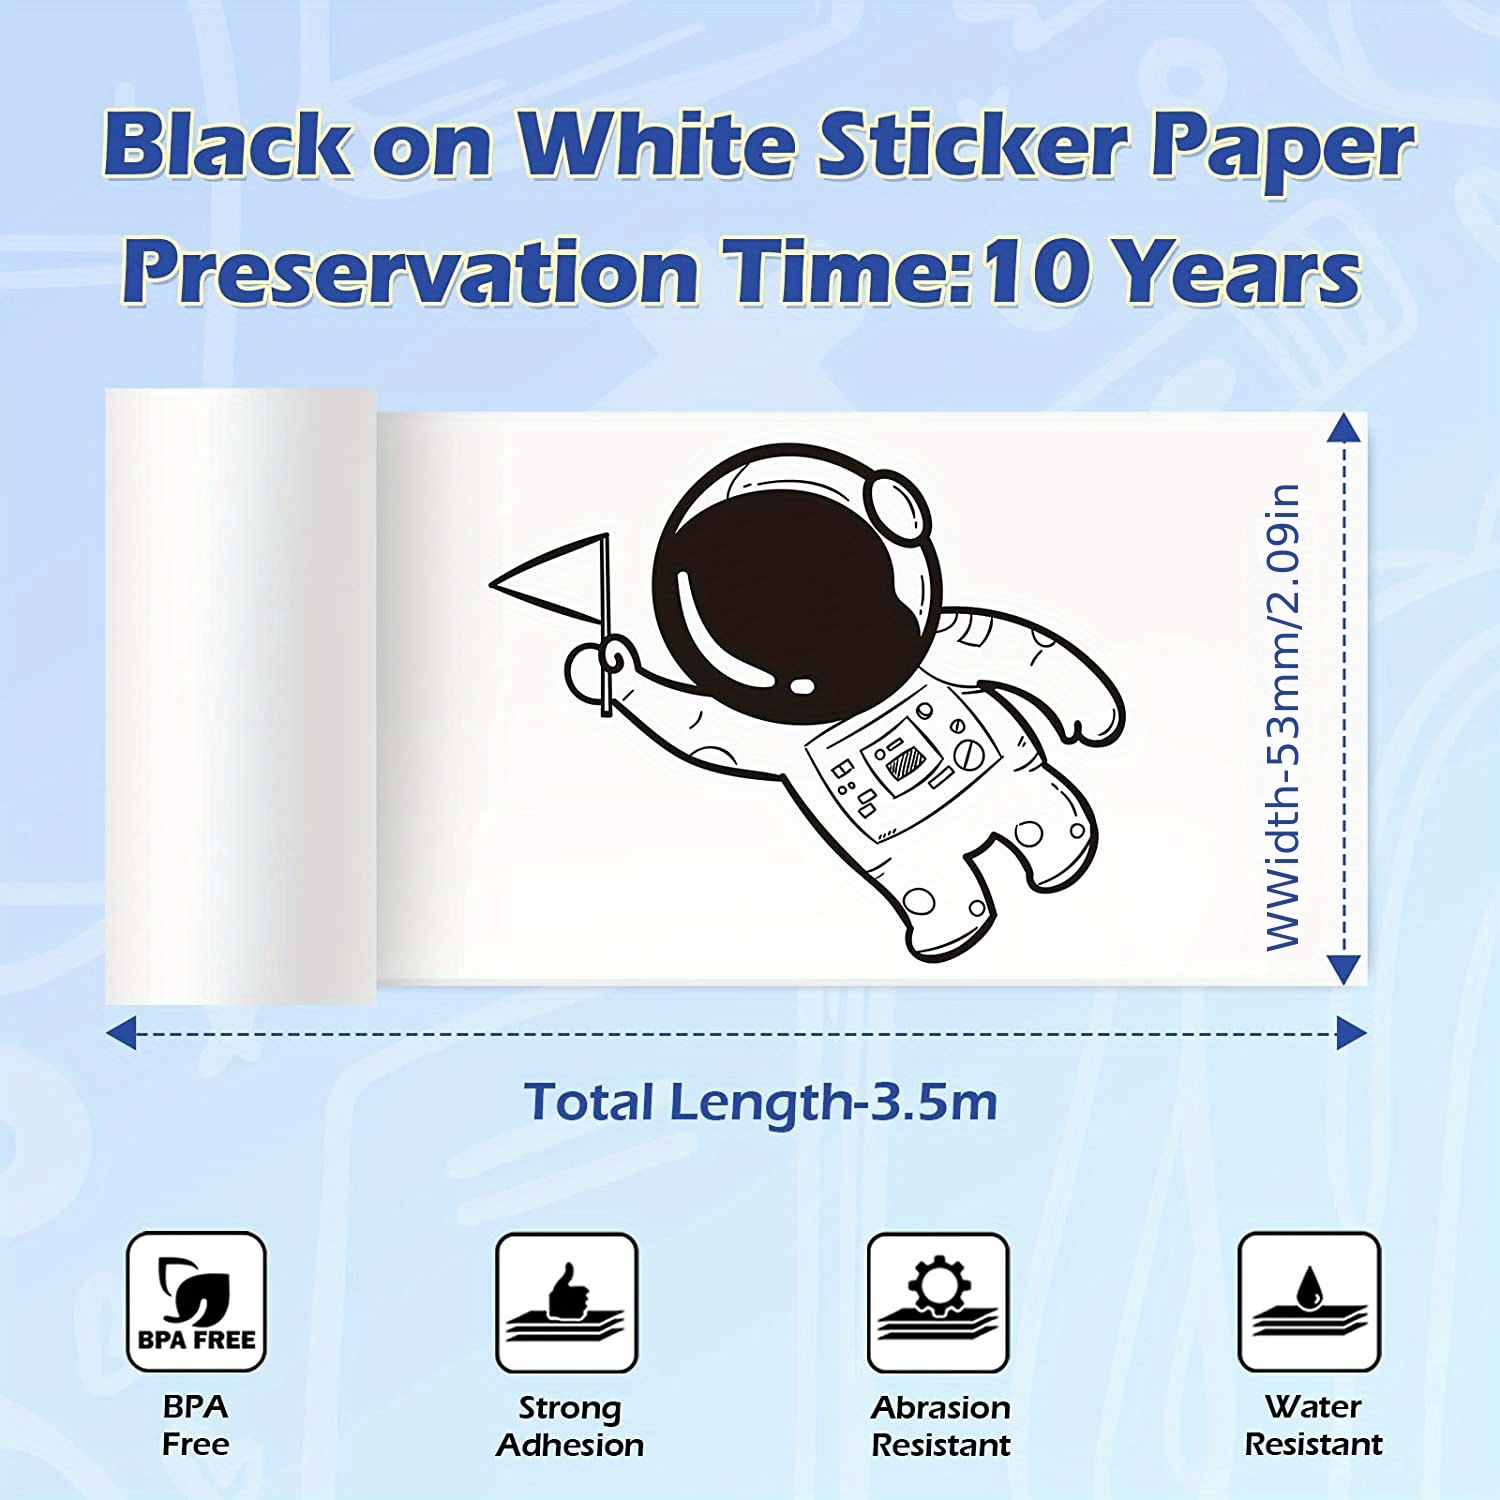  T02 Thermal Mini Sticker Printer Paper, White Self-Adhesive  Paper, Black On White Paper for Journal, Photo, To Do List, 50mm x 3.5m, 3  Rolls, Keep for 10 Years (Only Compatible